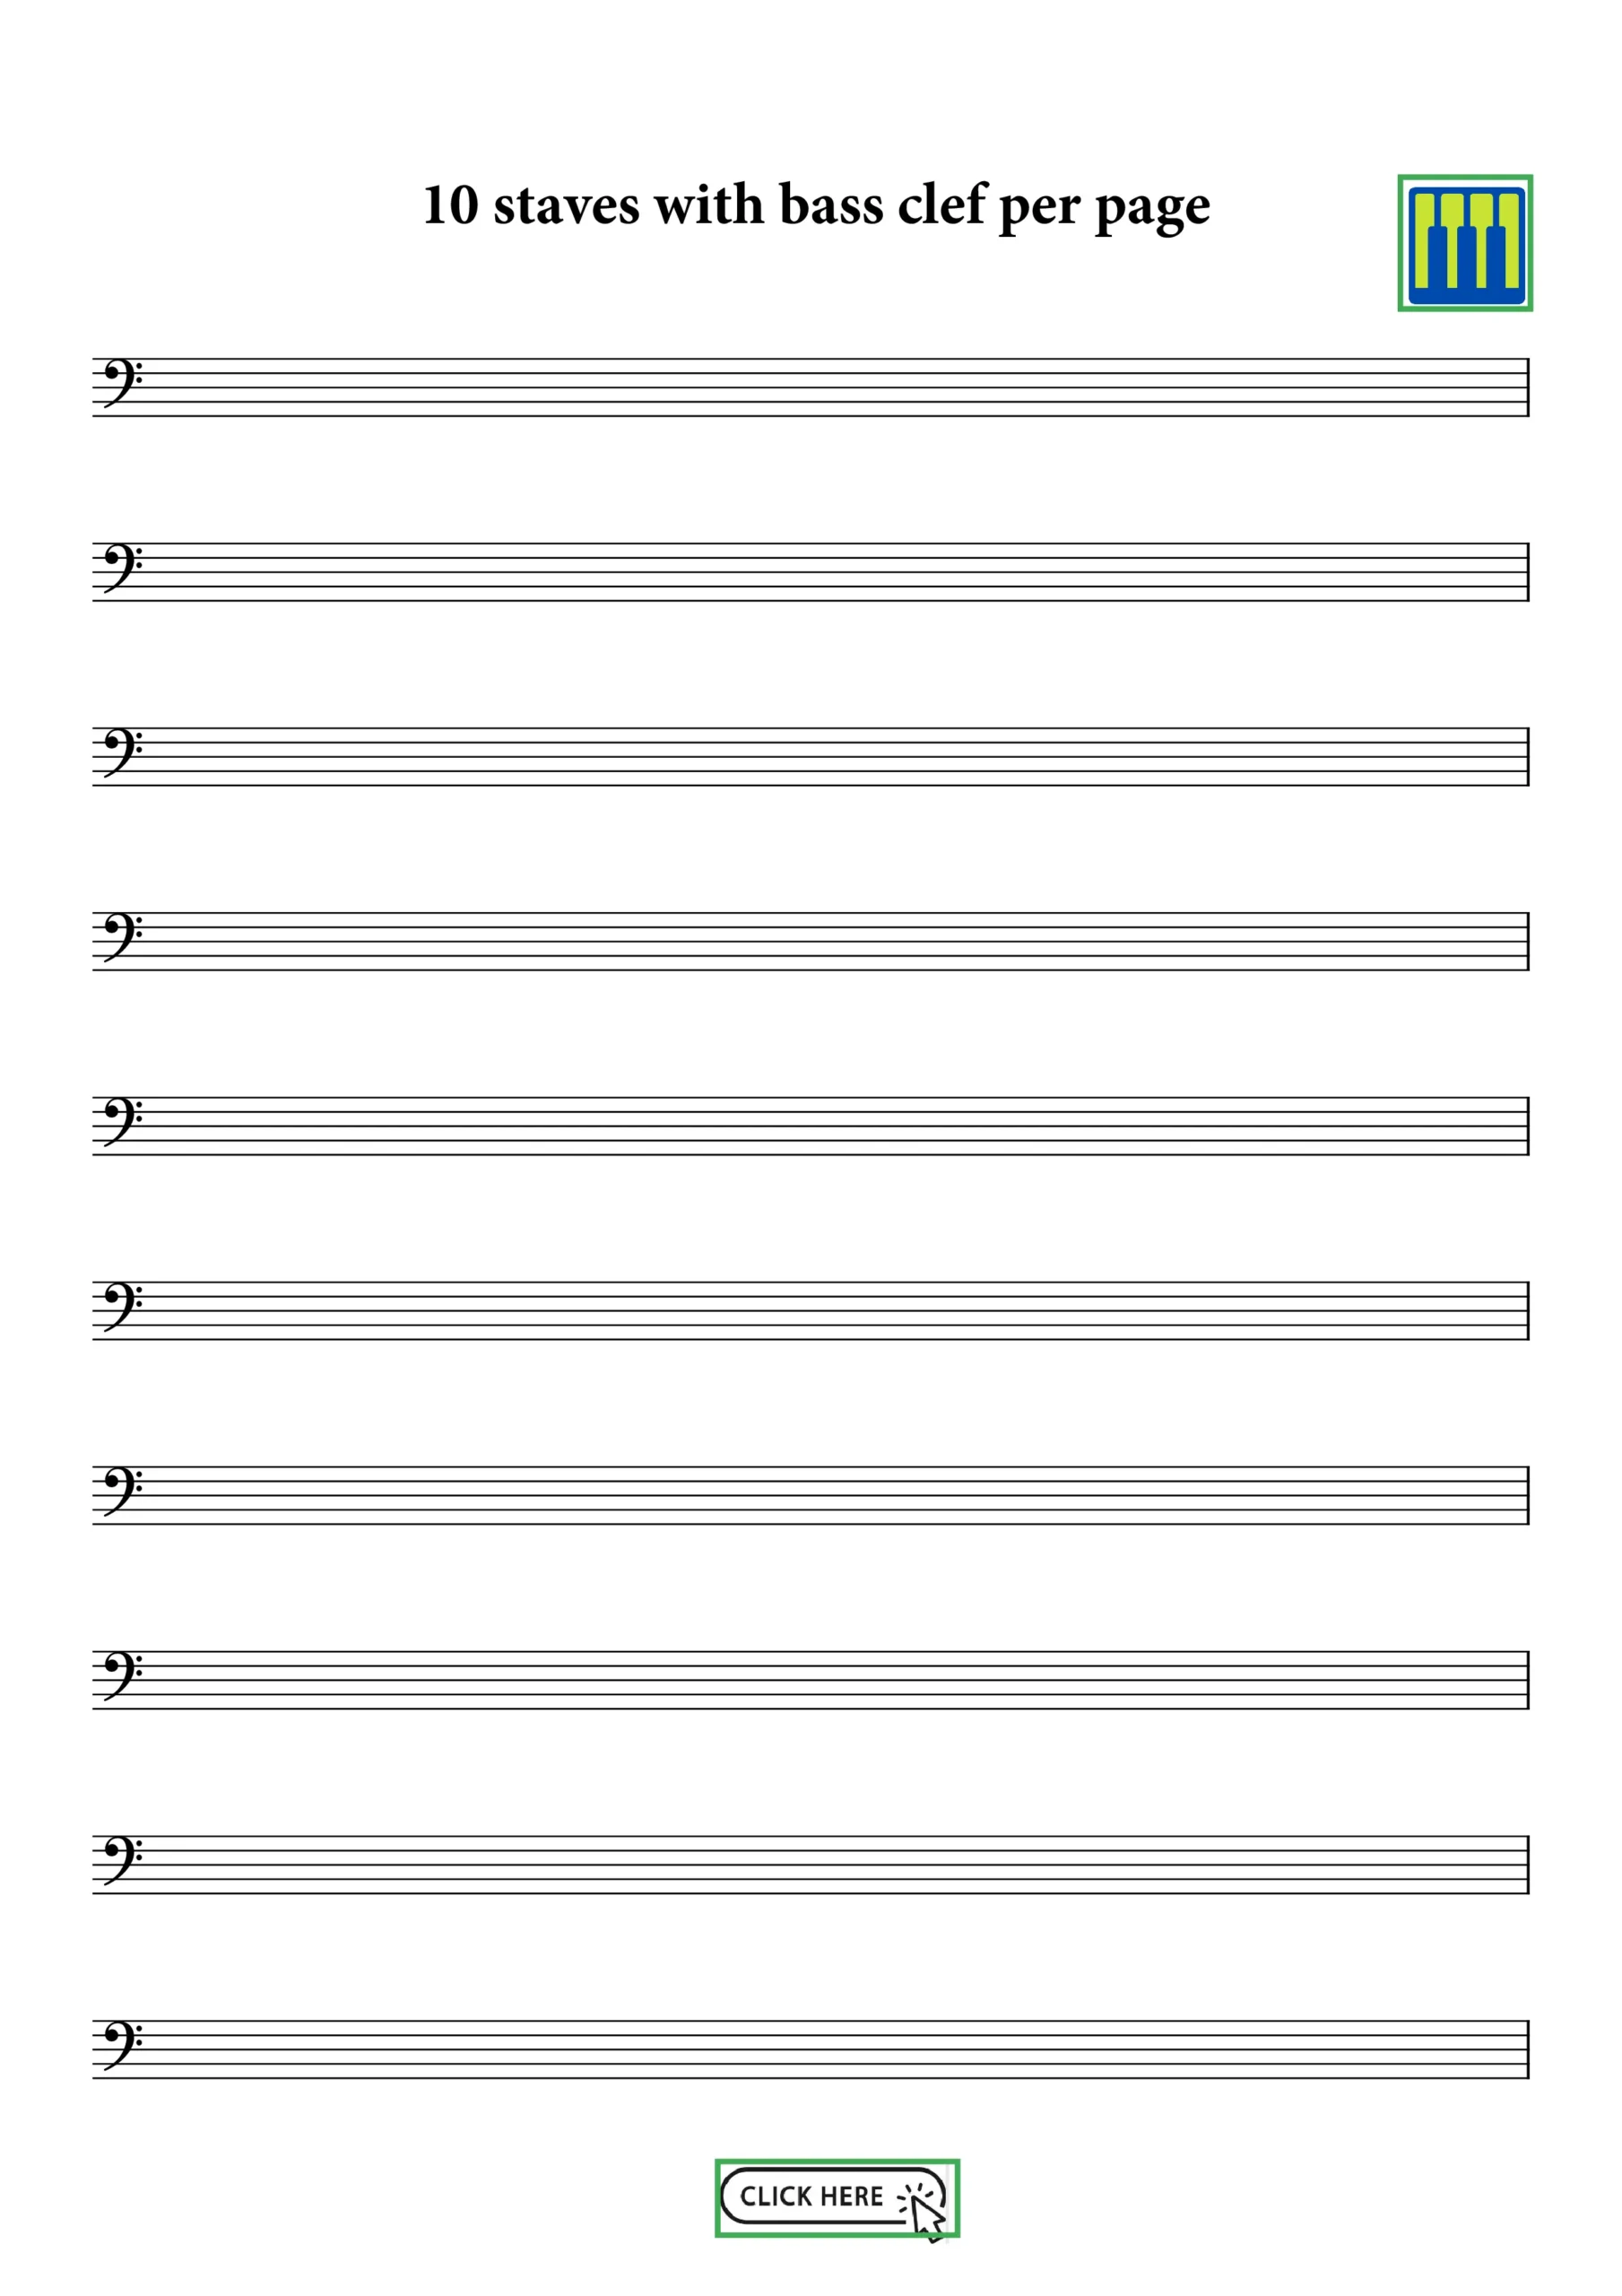 10 staves with bass clef per page